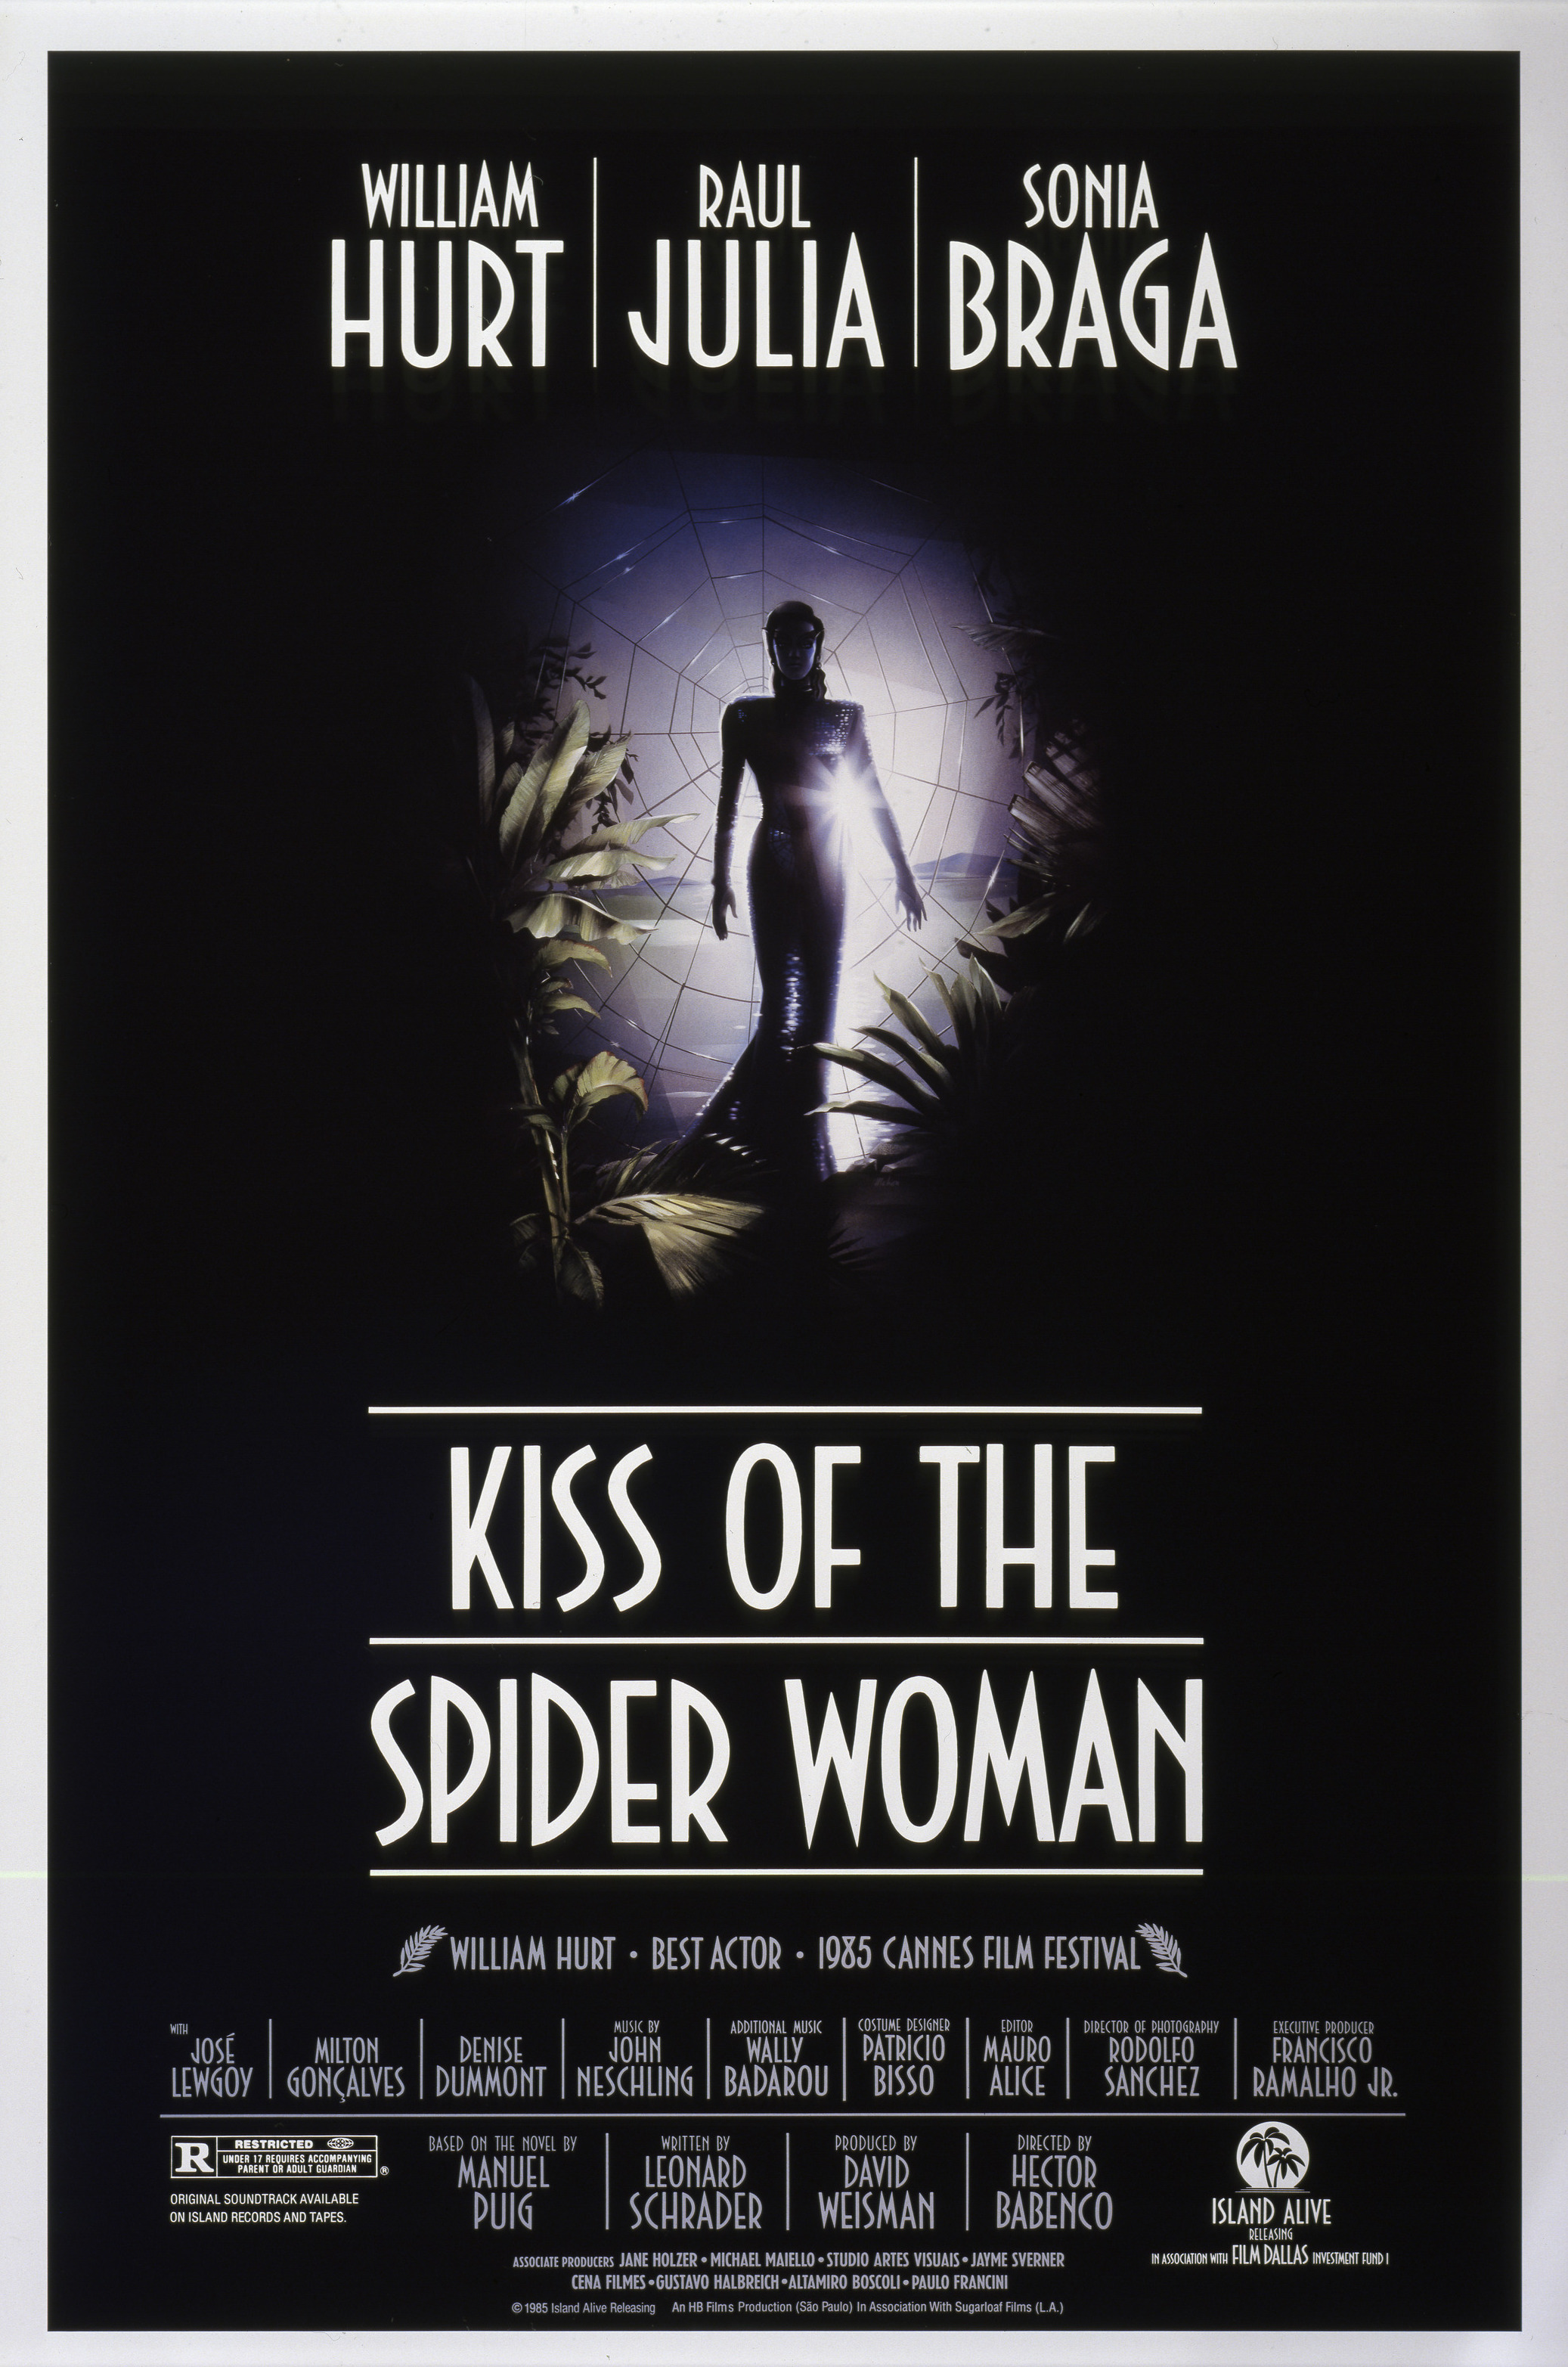 KISS OF THE SPIDER WOMAN (1985)